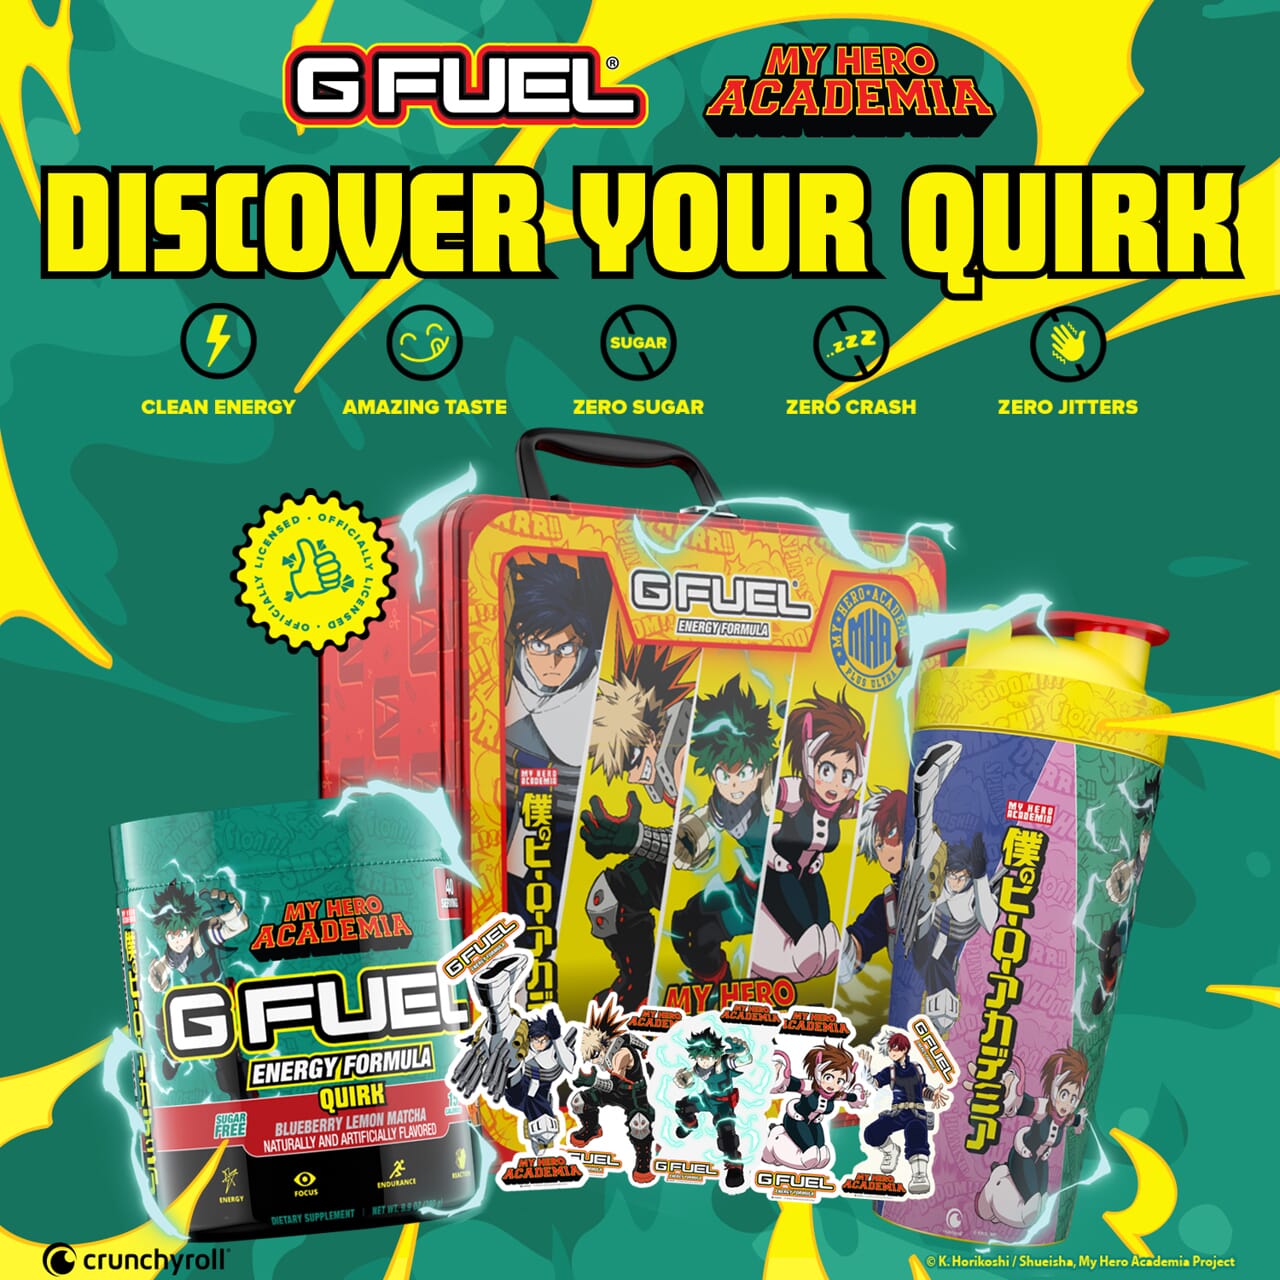 G FUEL Quirk Collector's Box, inspired by "My Hero Academia"